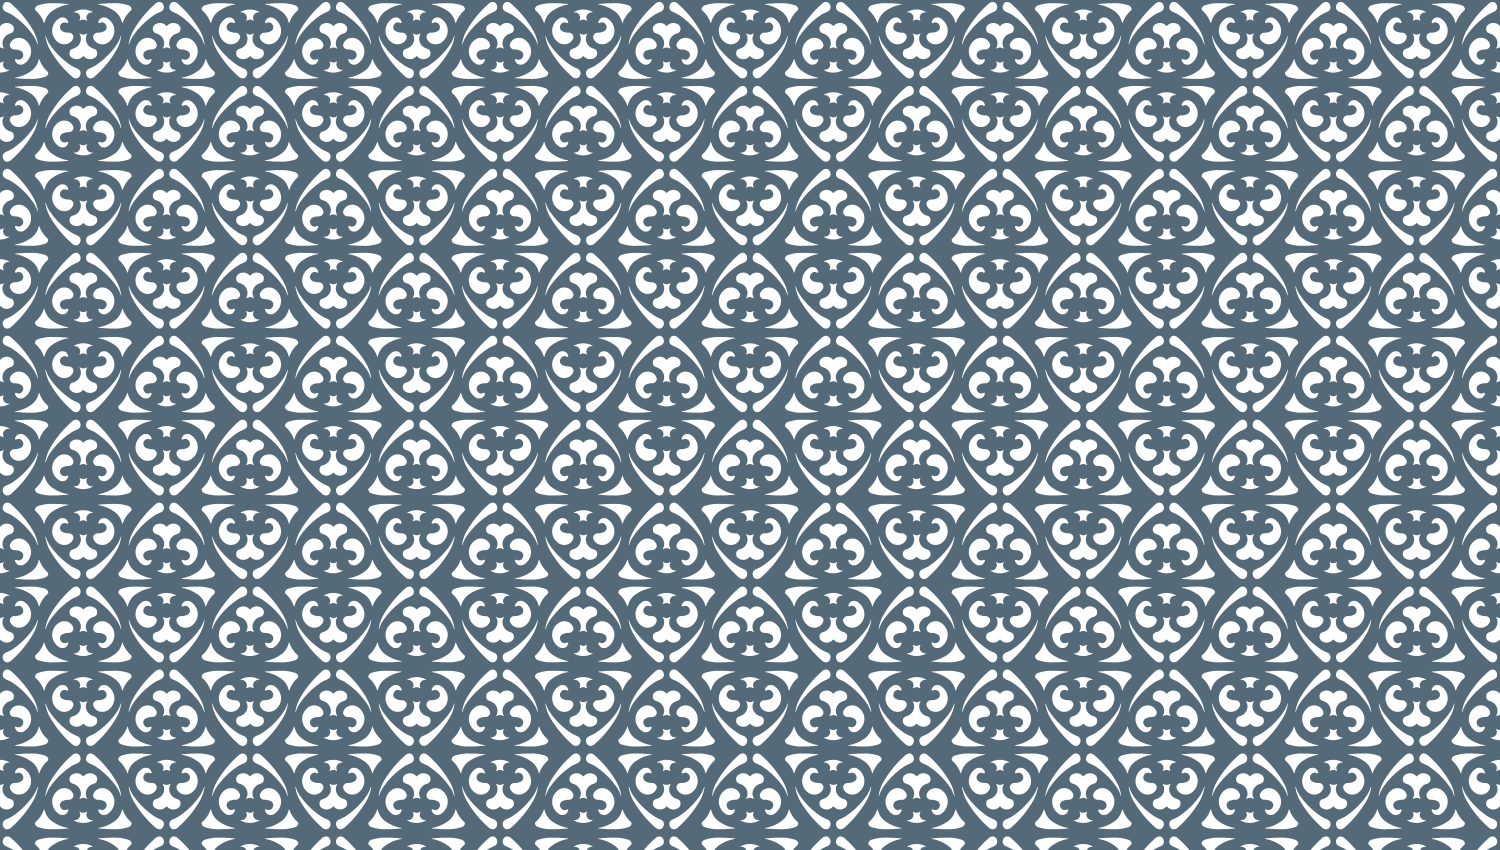 Parasoleil™ Flanigan© pattern displayed with a blue color overlay